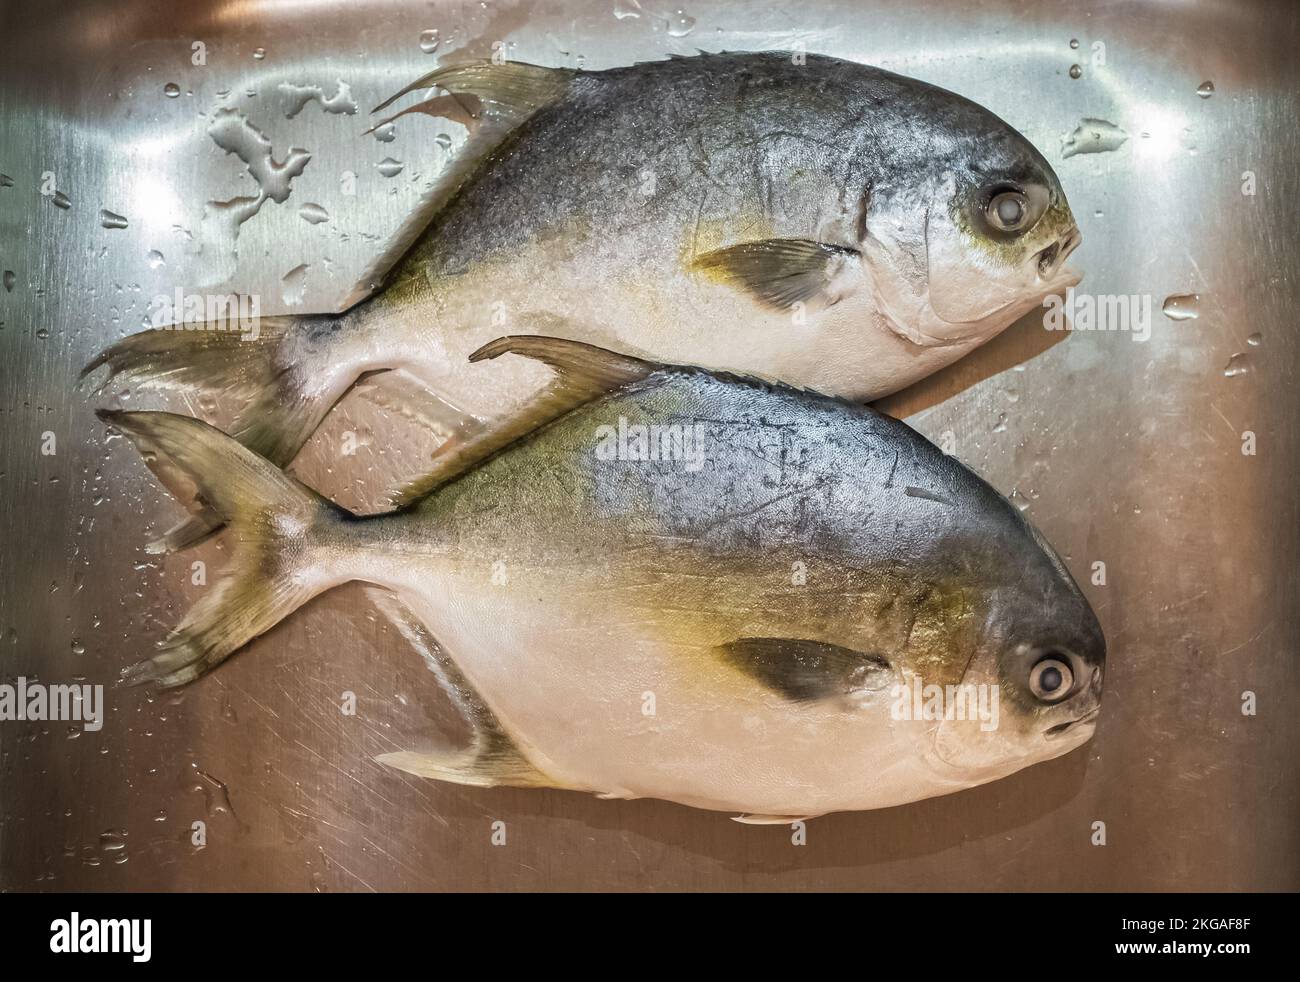 Whole Fresh Raw Golden Pompano fish. Freshly caught silver yellow pompano fish. Nobody, selective focus, cooking and eating healthy concept Stock Photo